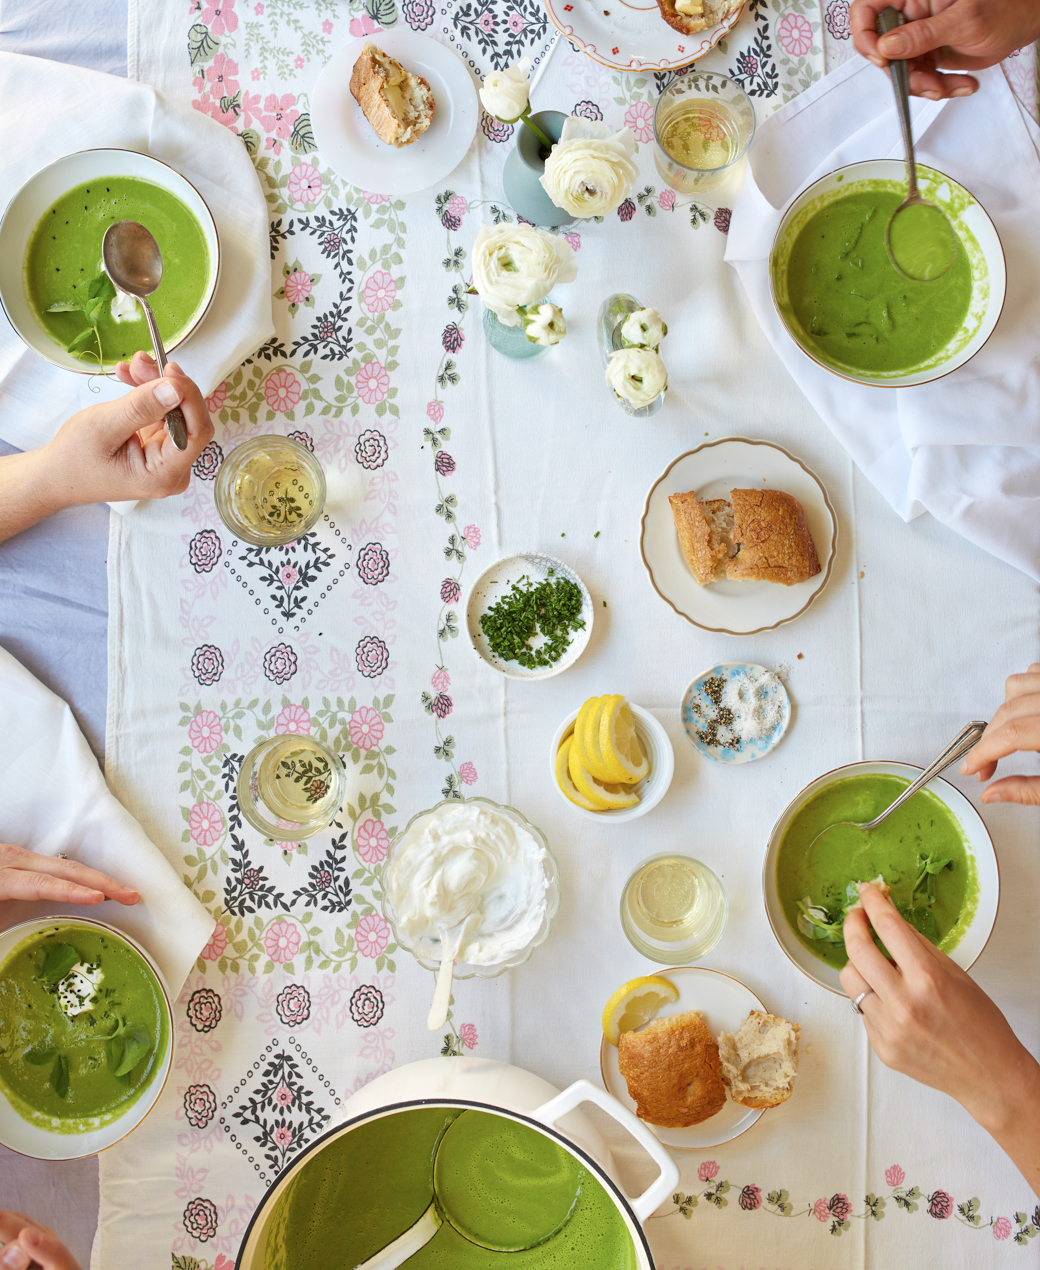 0001_Green Pea Soup with Chive Blossoms, Yogurt and Nigella